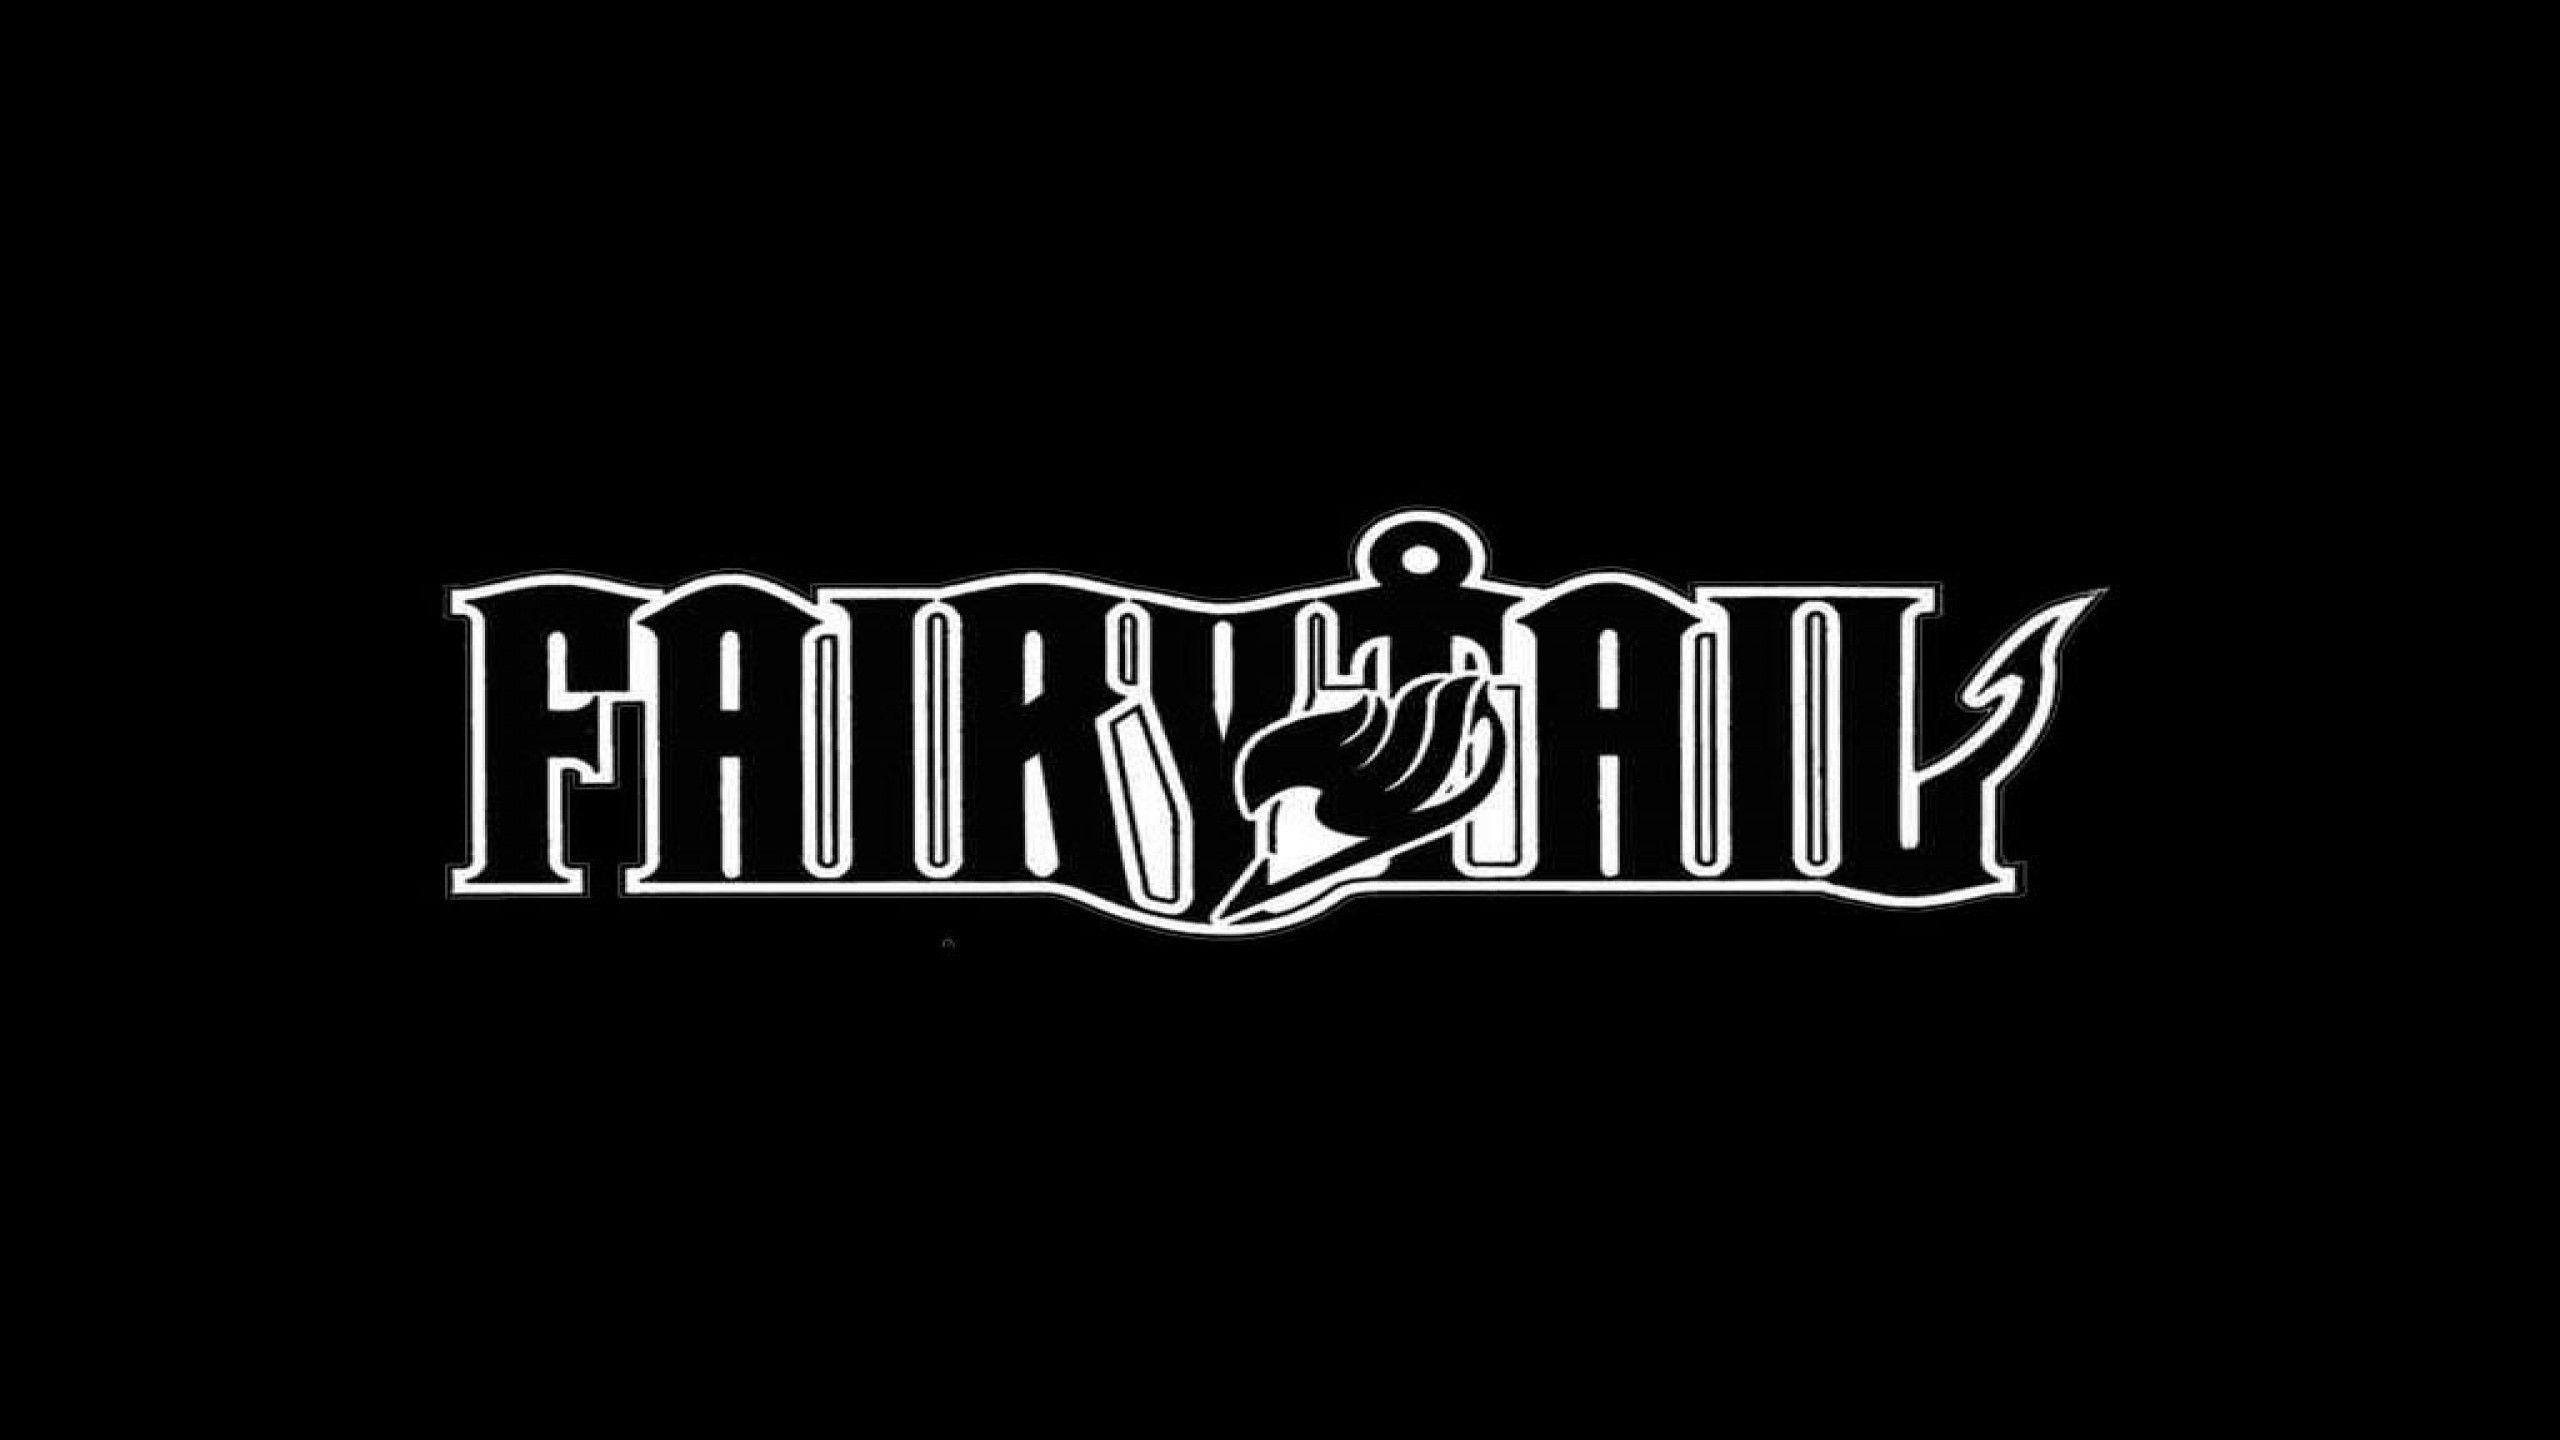 Fairy Tail Logo wallpaperDownload free cool full HD background